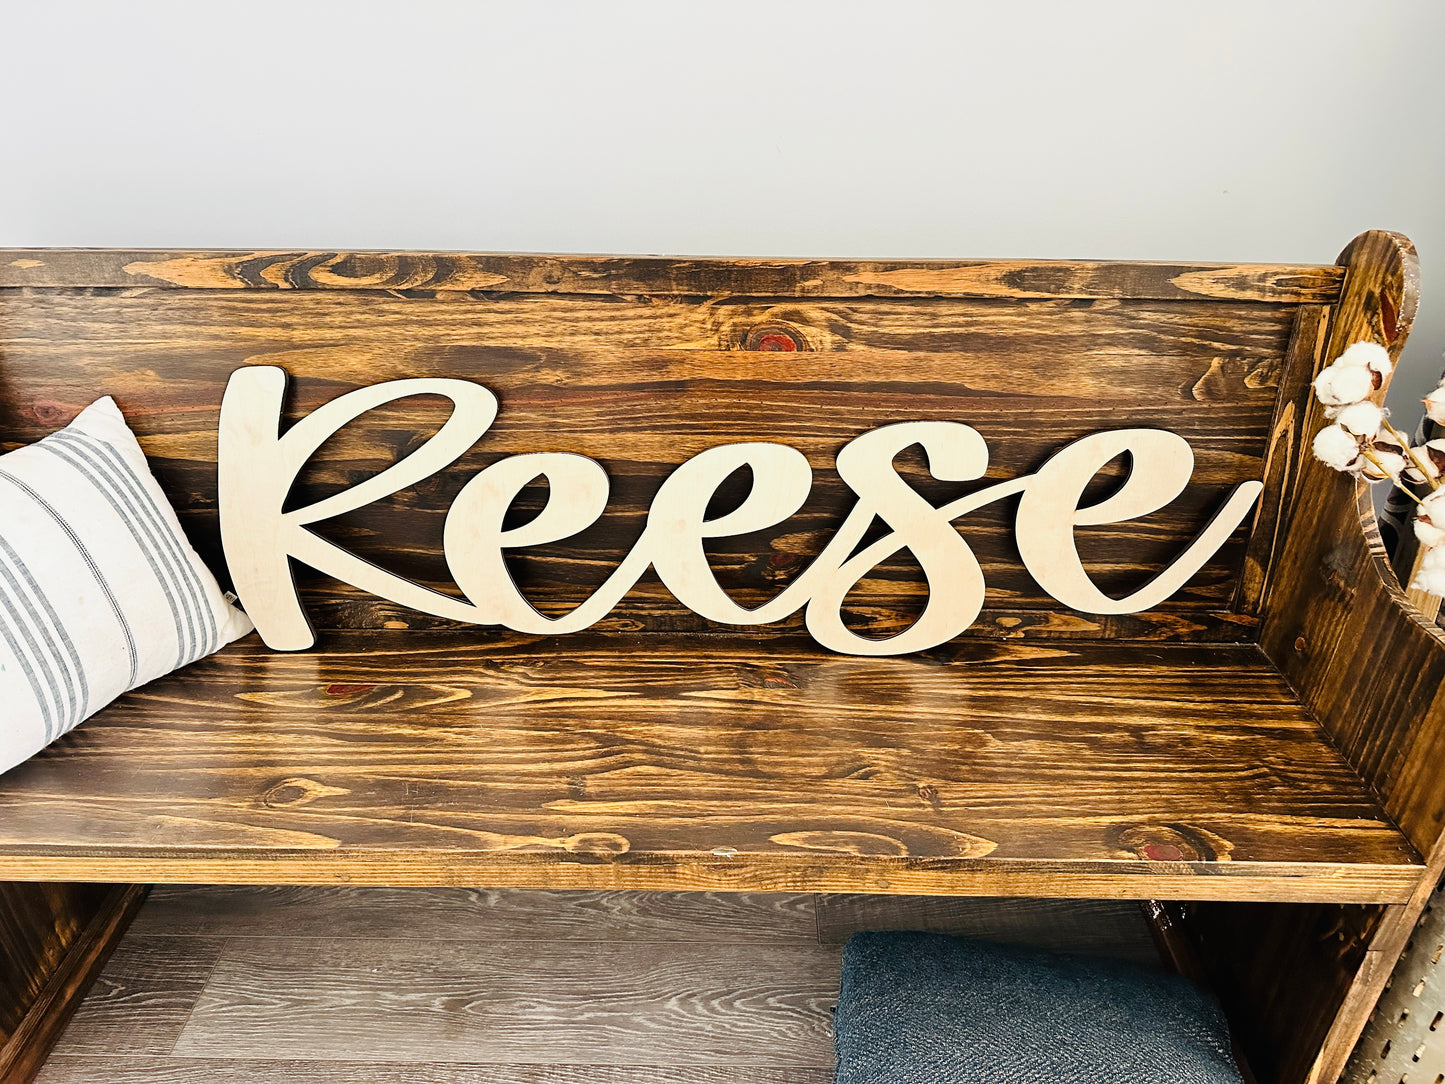 Name Cut Out - Paisley Grace Makery